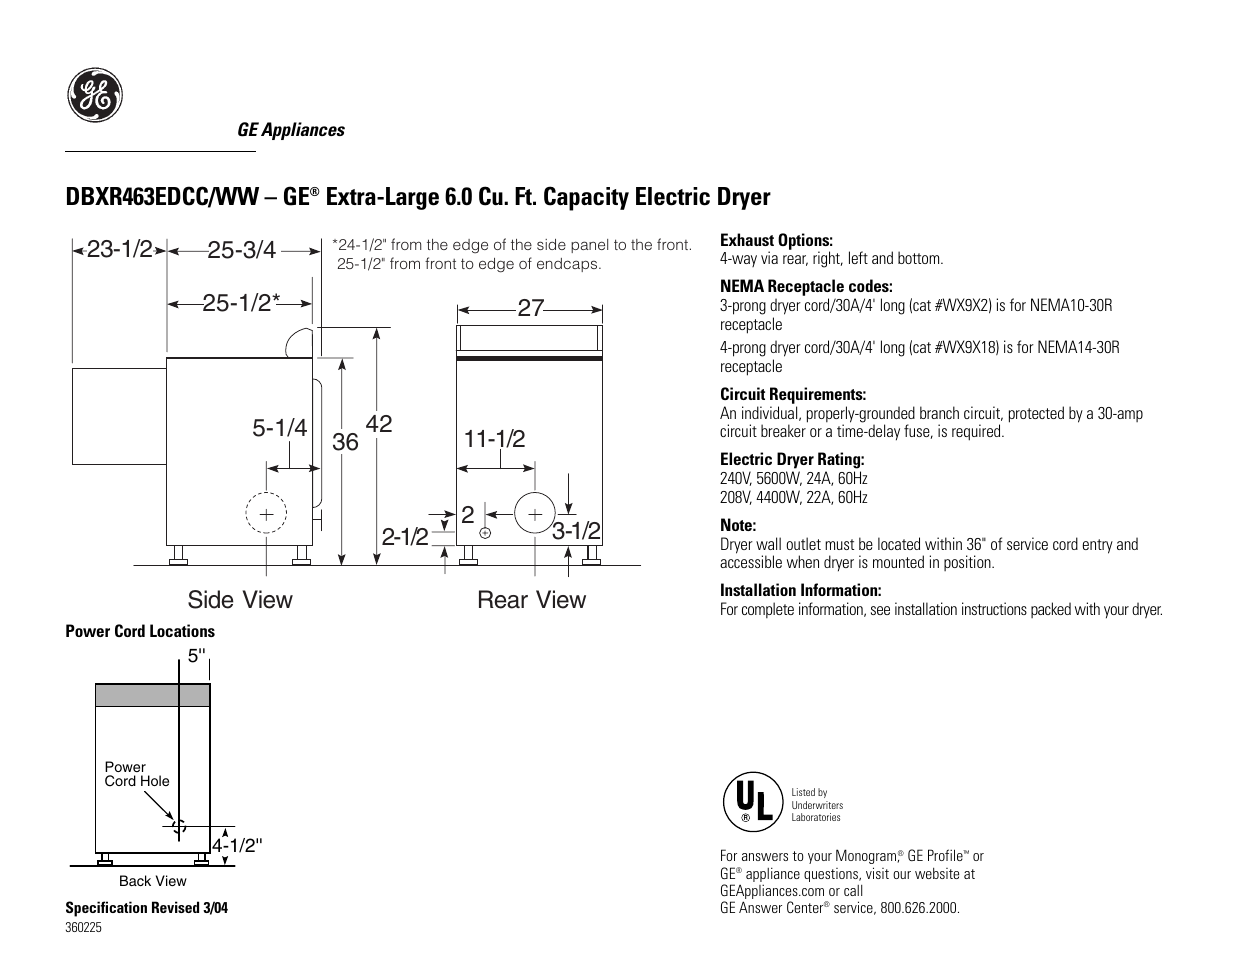 GE DBXR463EDCC/WW User Manual | 3 pages